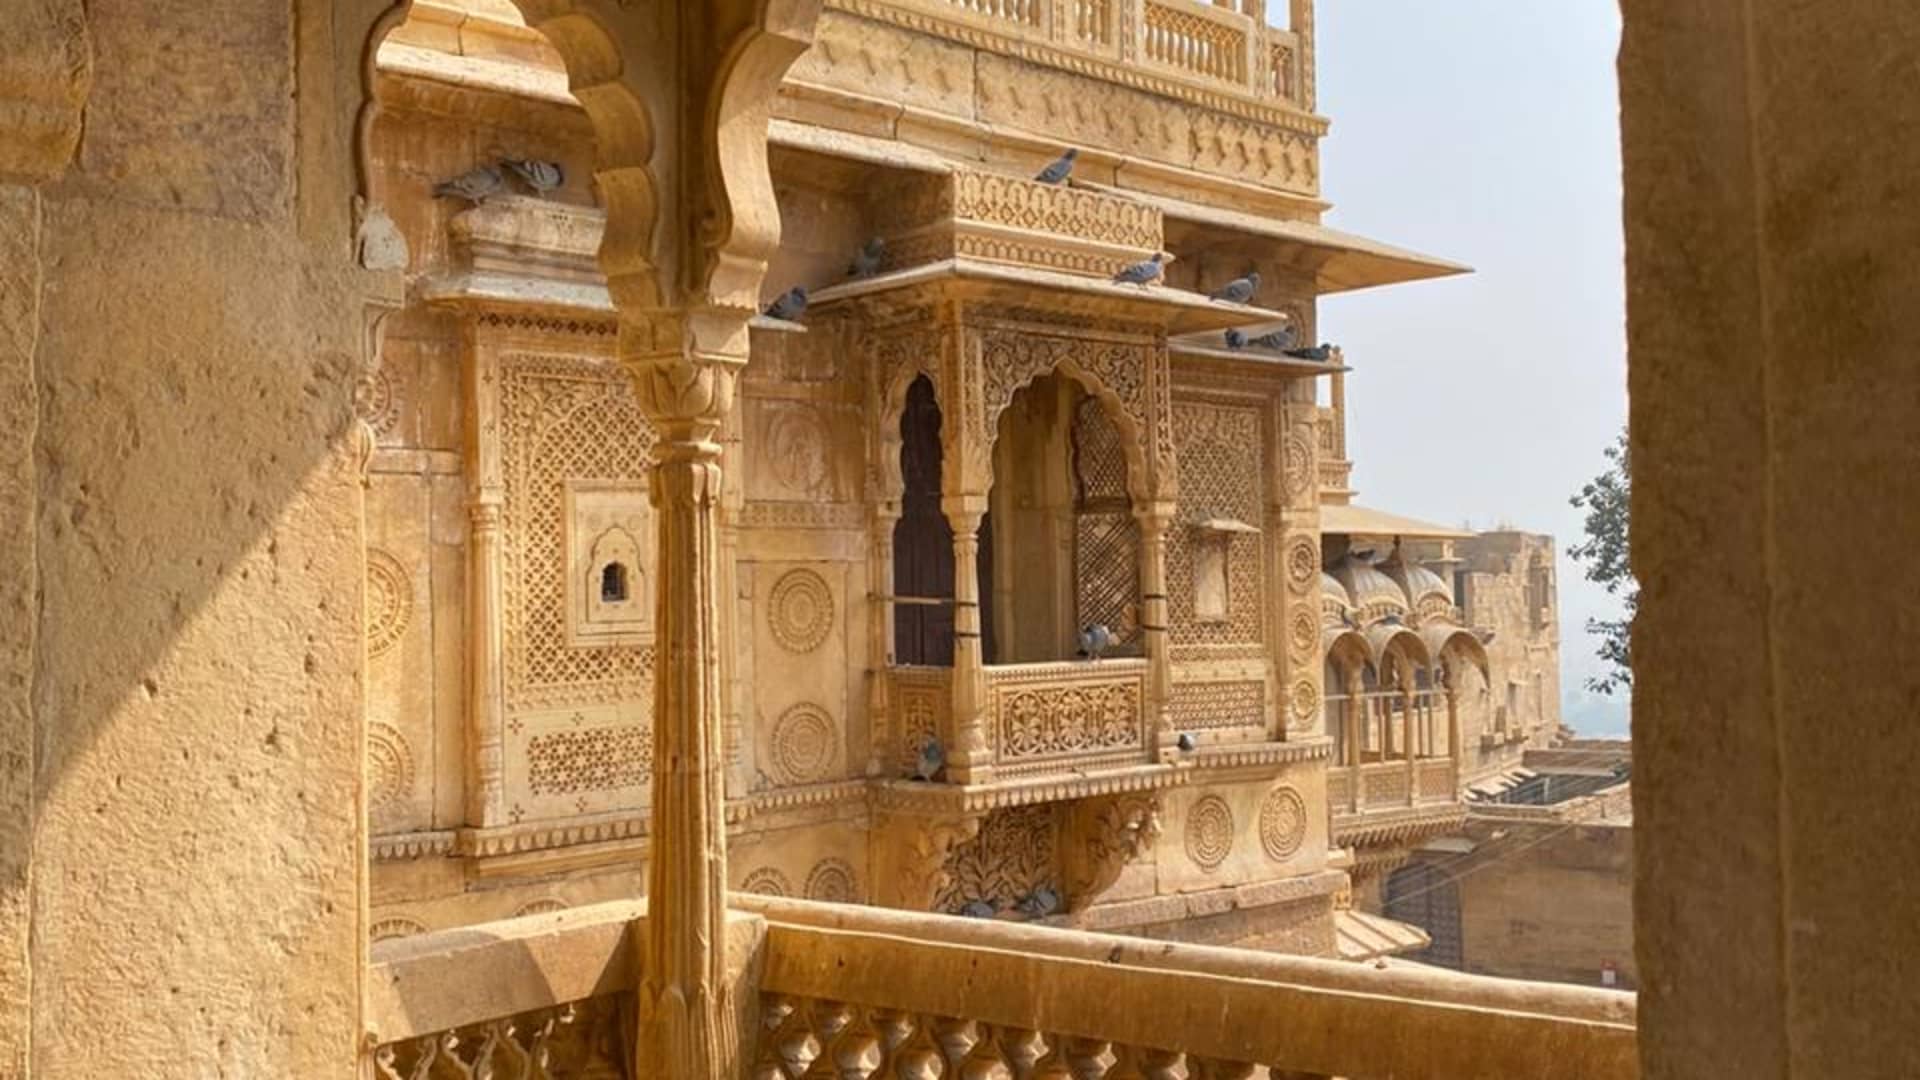 The fort has intricate hand-carved balconied windows, known as 